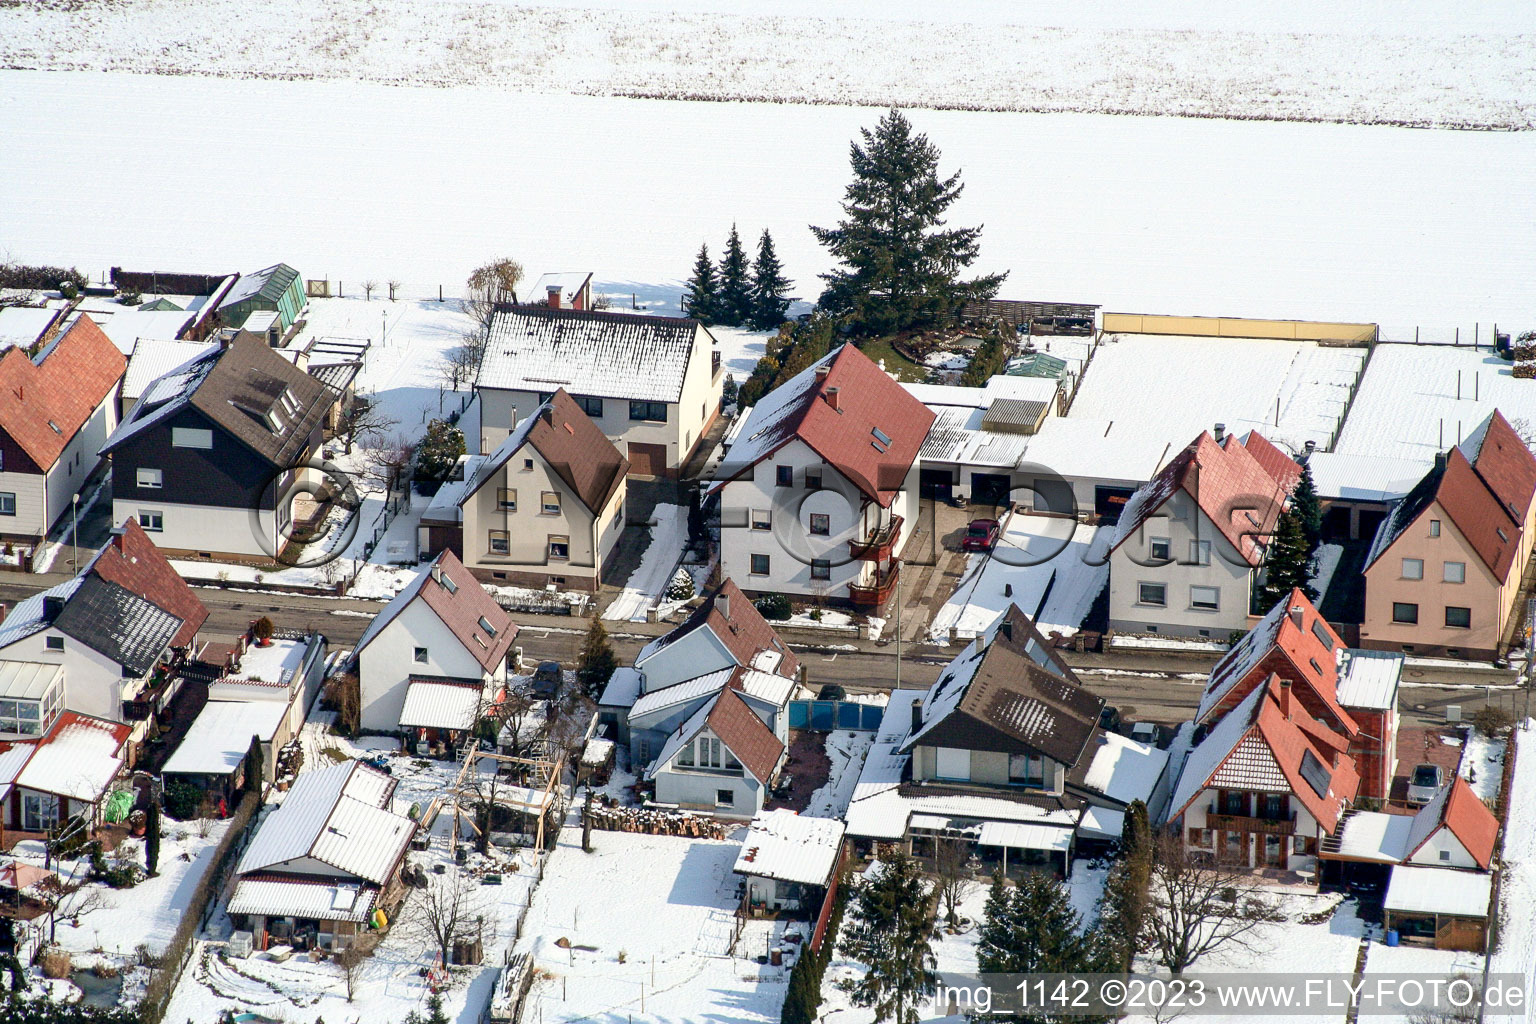 Aerial photograpy of S in Freckenfeld in the state Rhineland-Palatinate, Germany